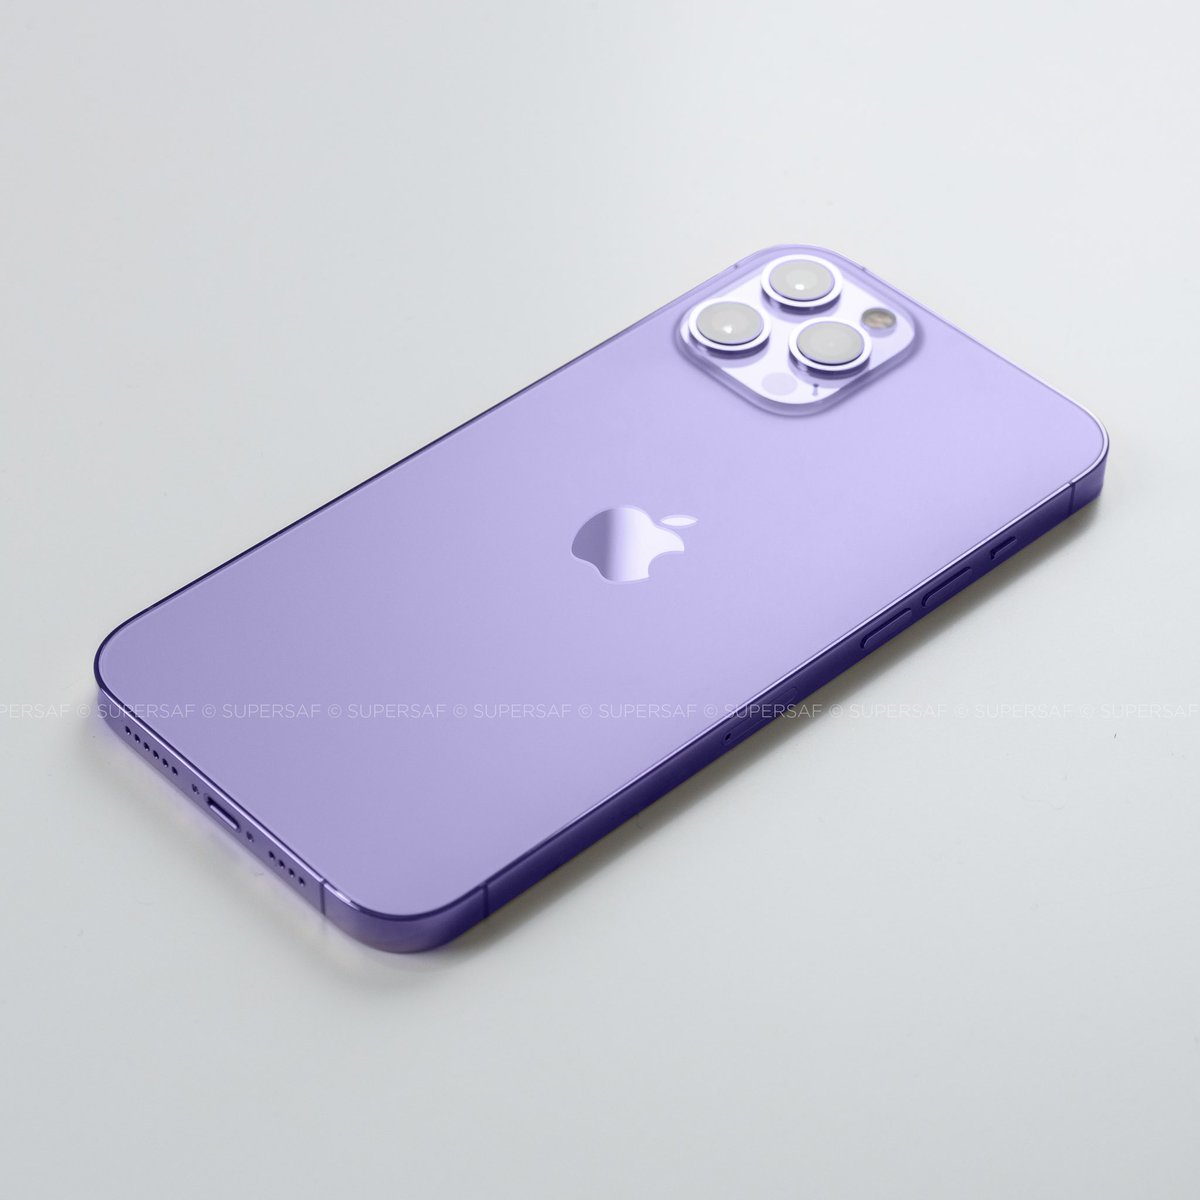 Safwan Ahmedmia What If We Had A Purple Iphone 12 Pro Max